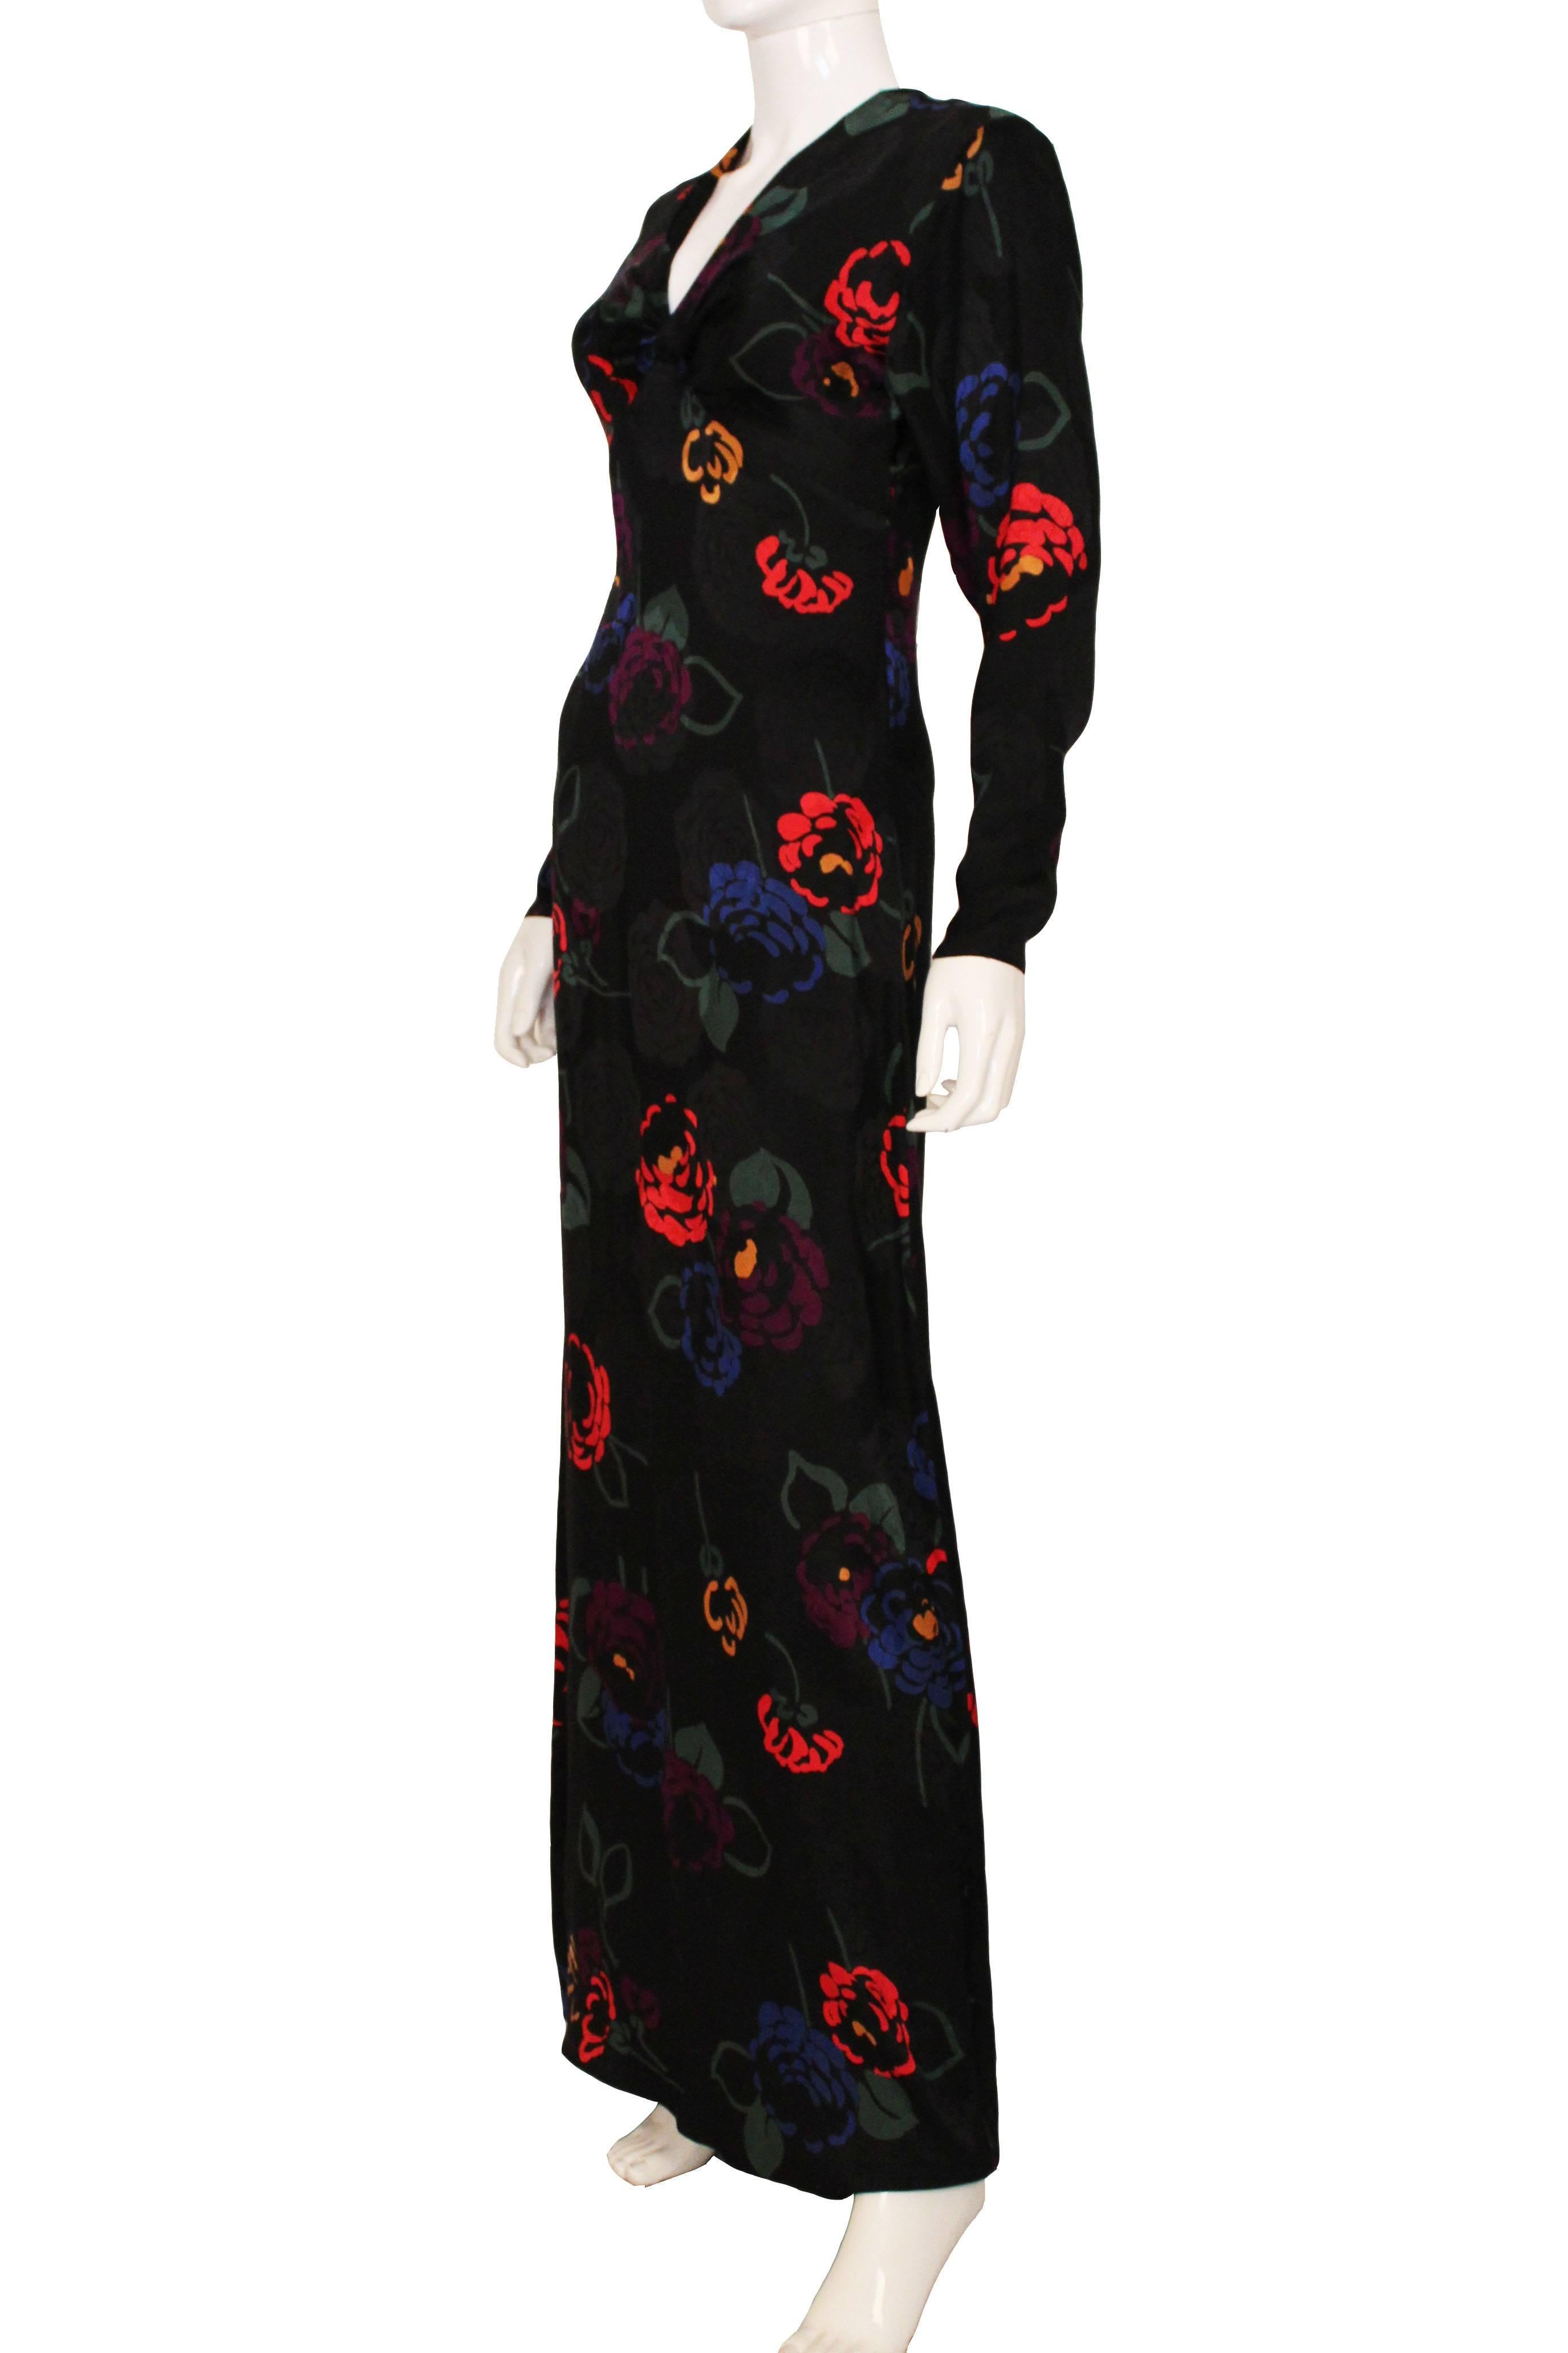 This is a stunning 1970s evening dress made from a glossy silk fabric. The main colour of the dress is black with red, yellow, purple and blue rose prints, with green leaves. The print is quite a modern floral print as it is a block colour design